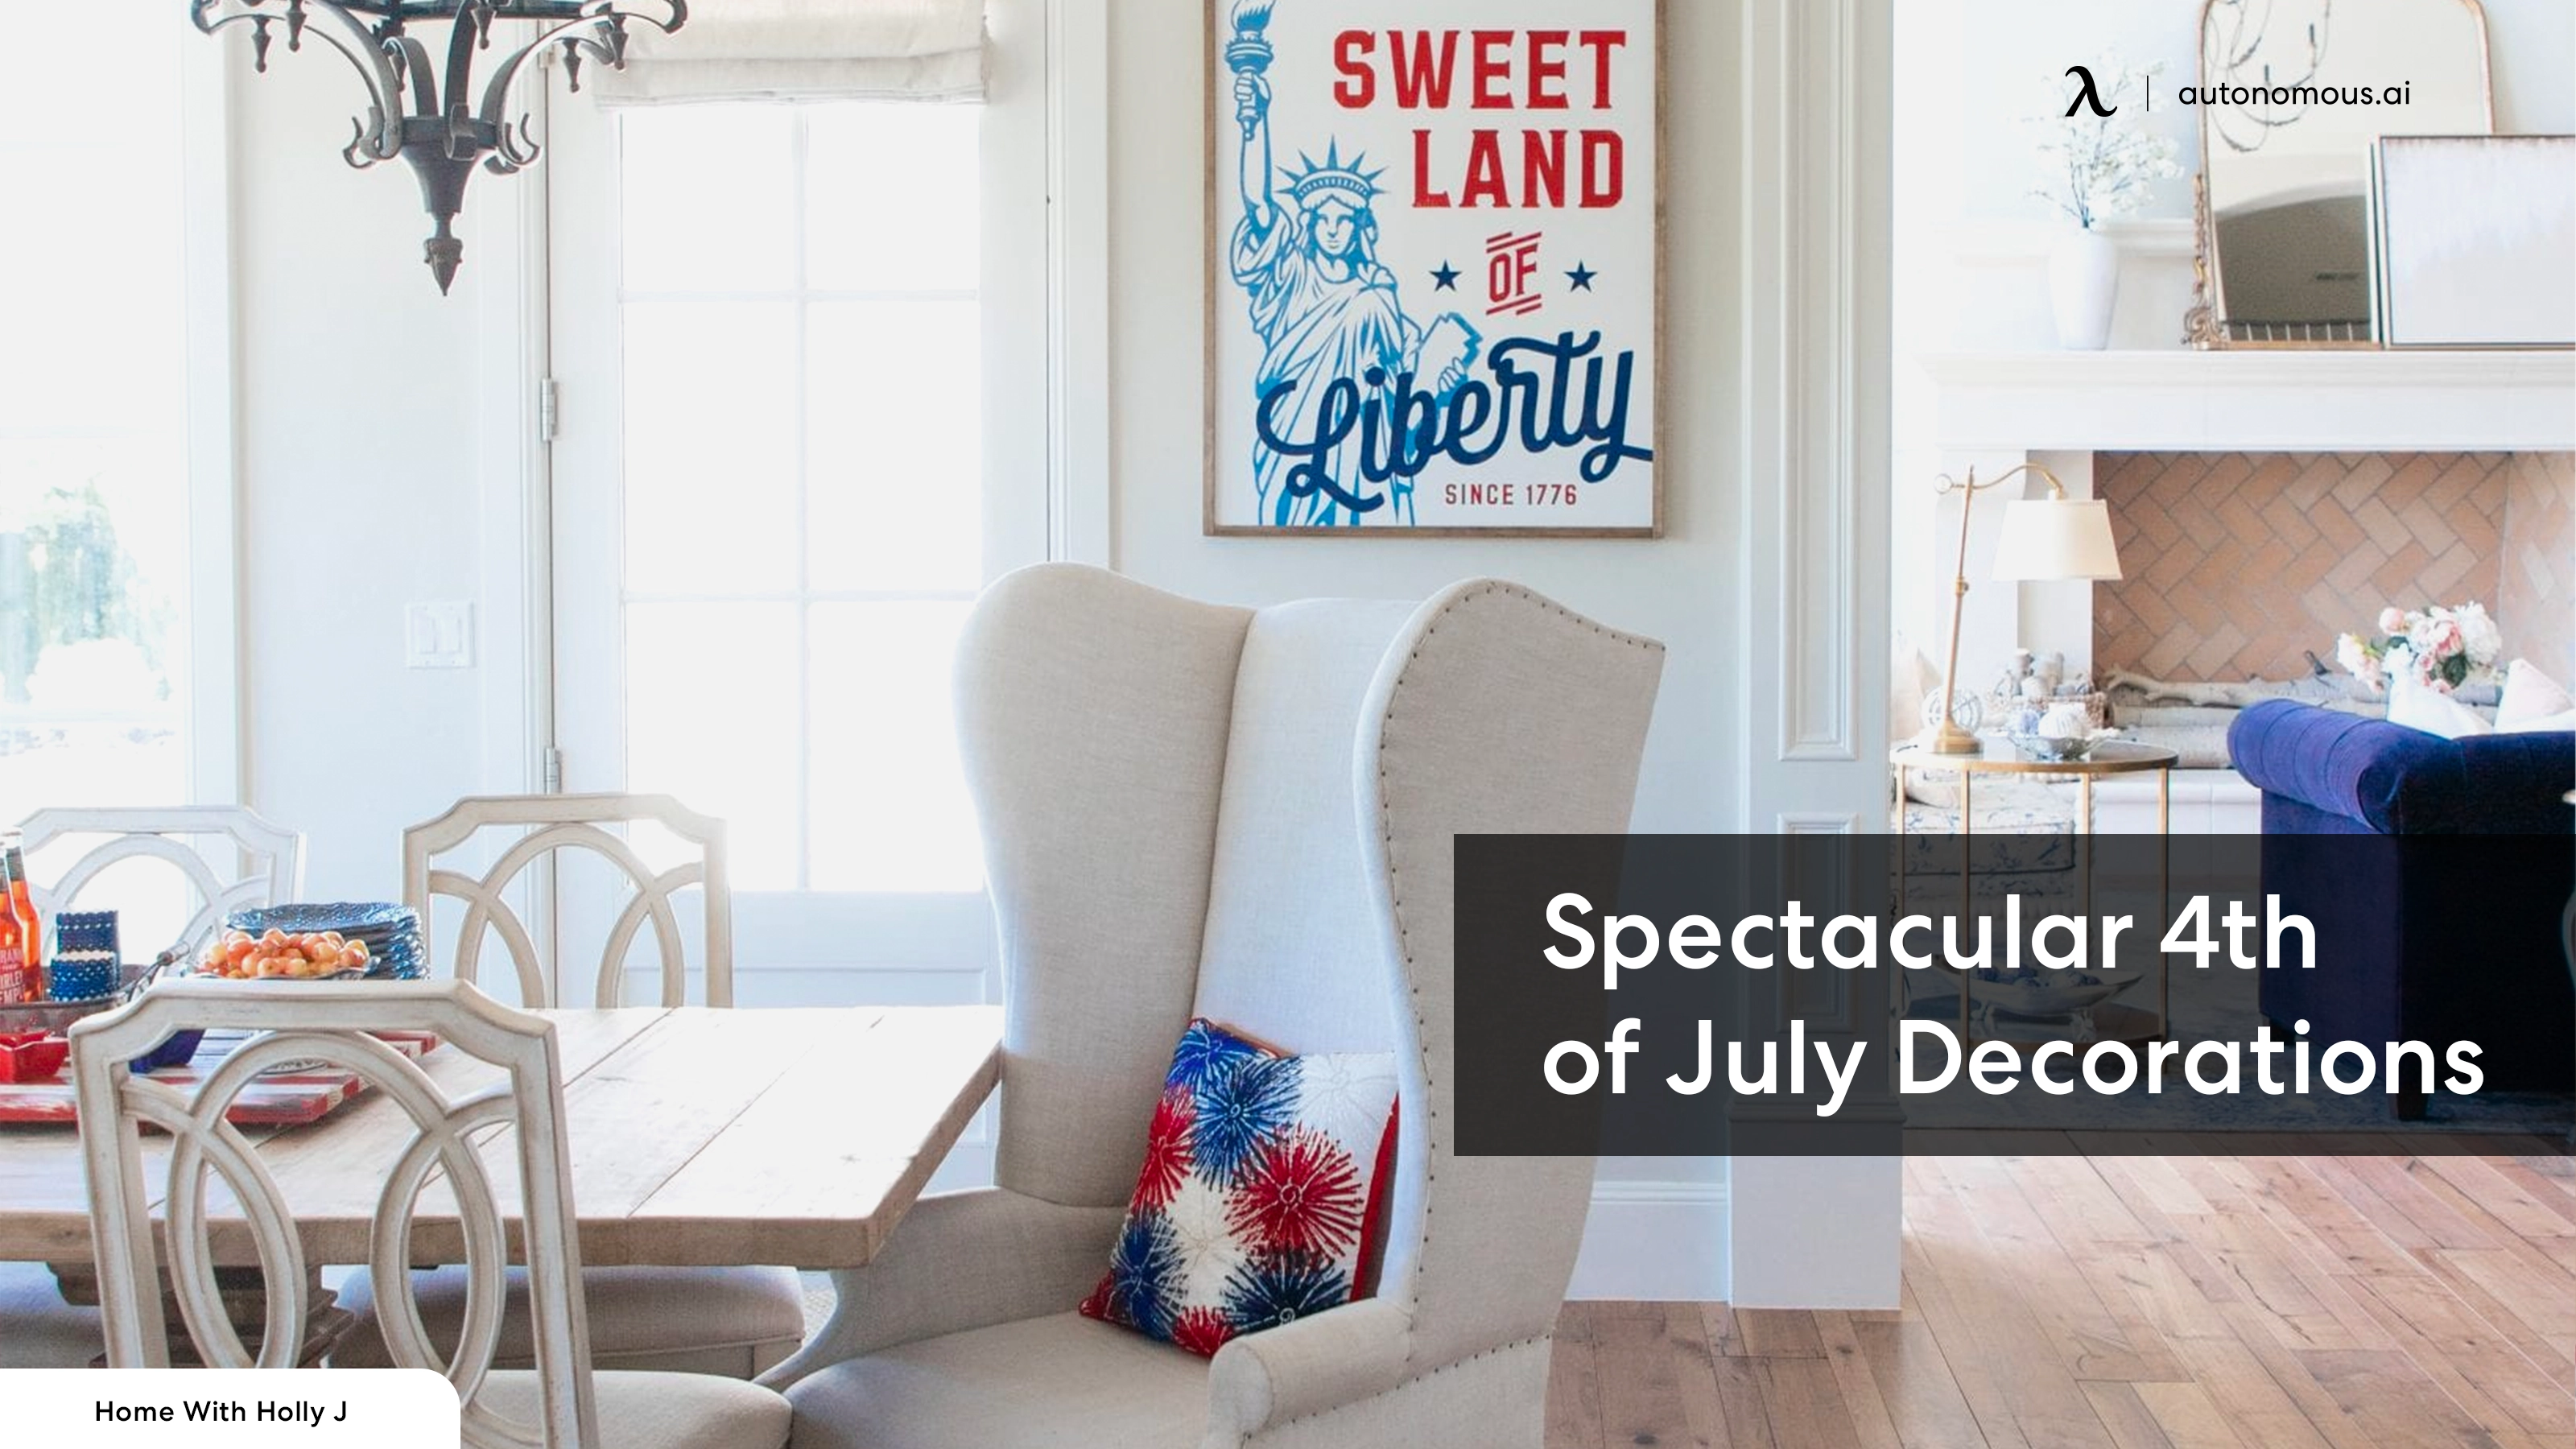 Spectacular 4th of July Decorations to Light Up Your Celebration